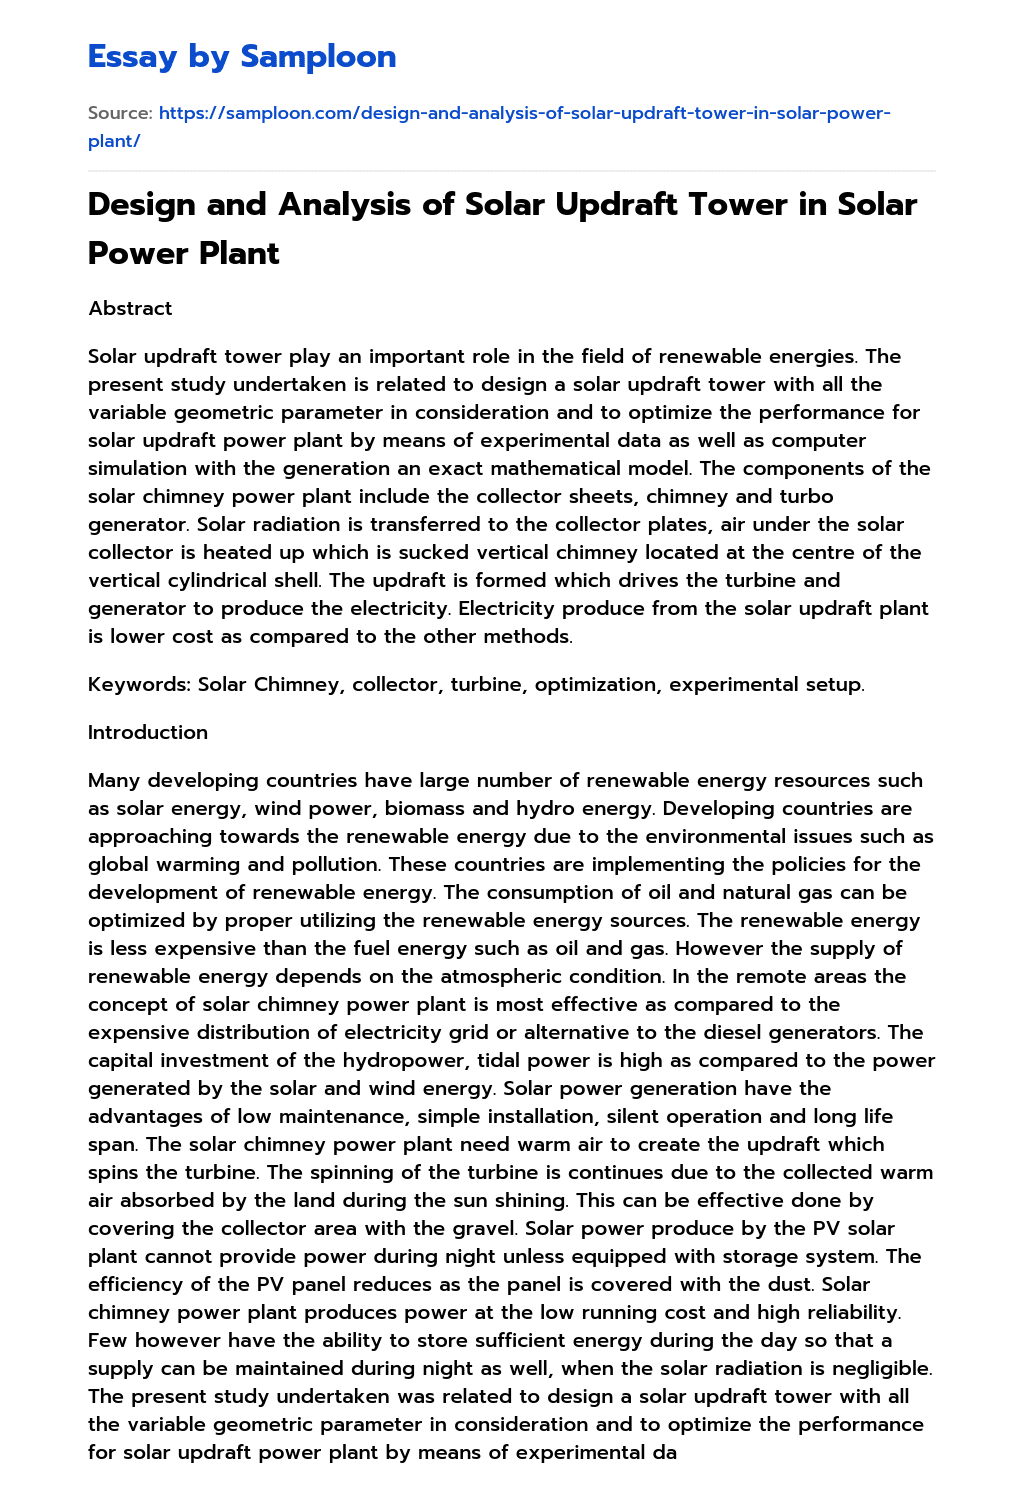 Design and Analysis of Solar Updraft Tower in Solar Power Plant essay